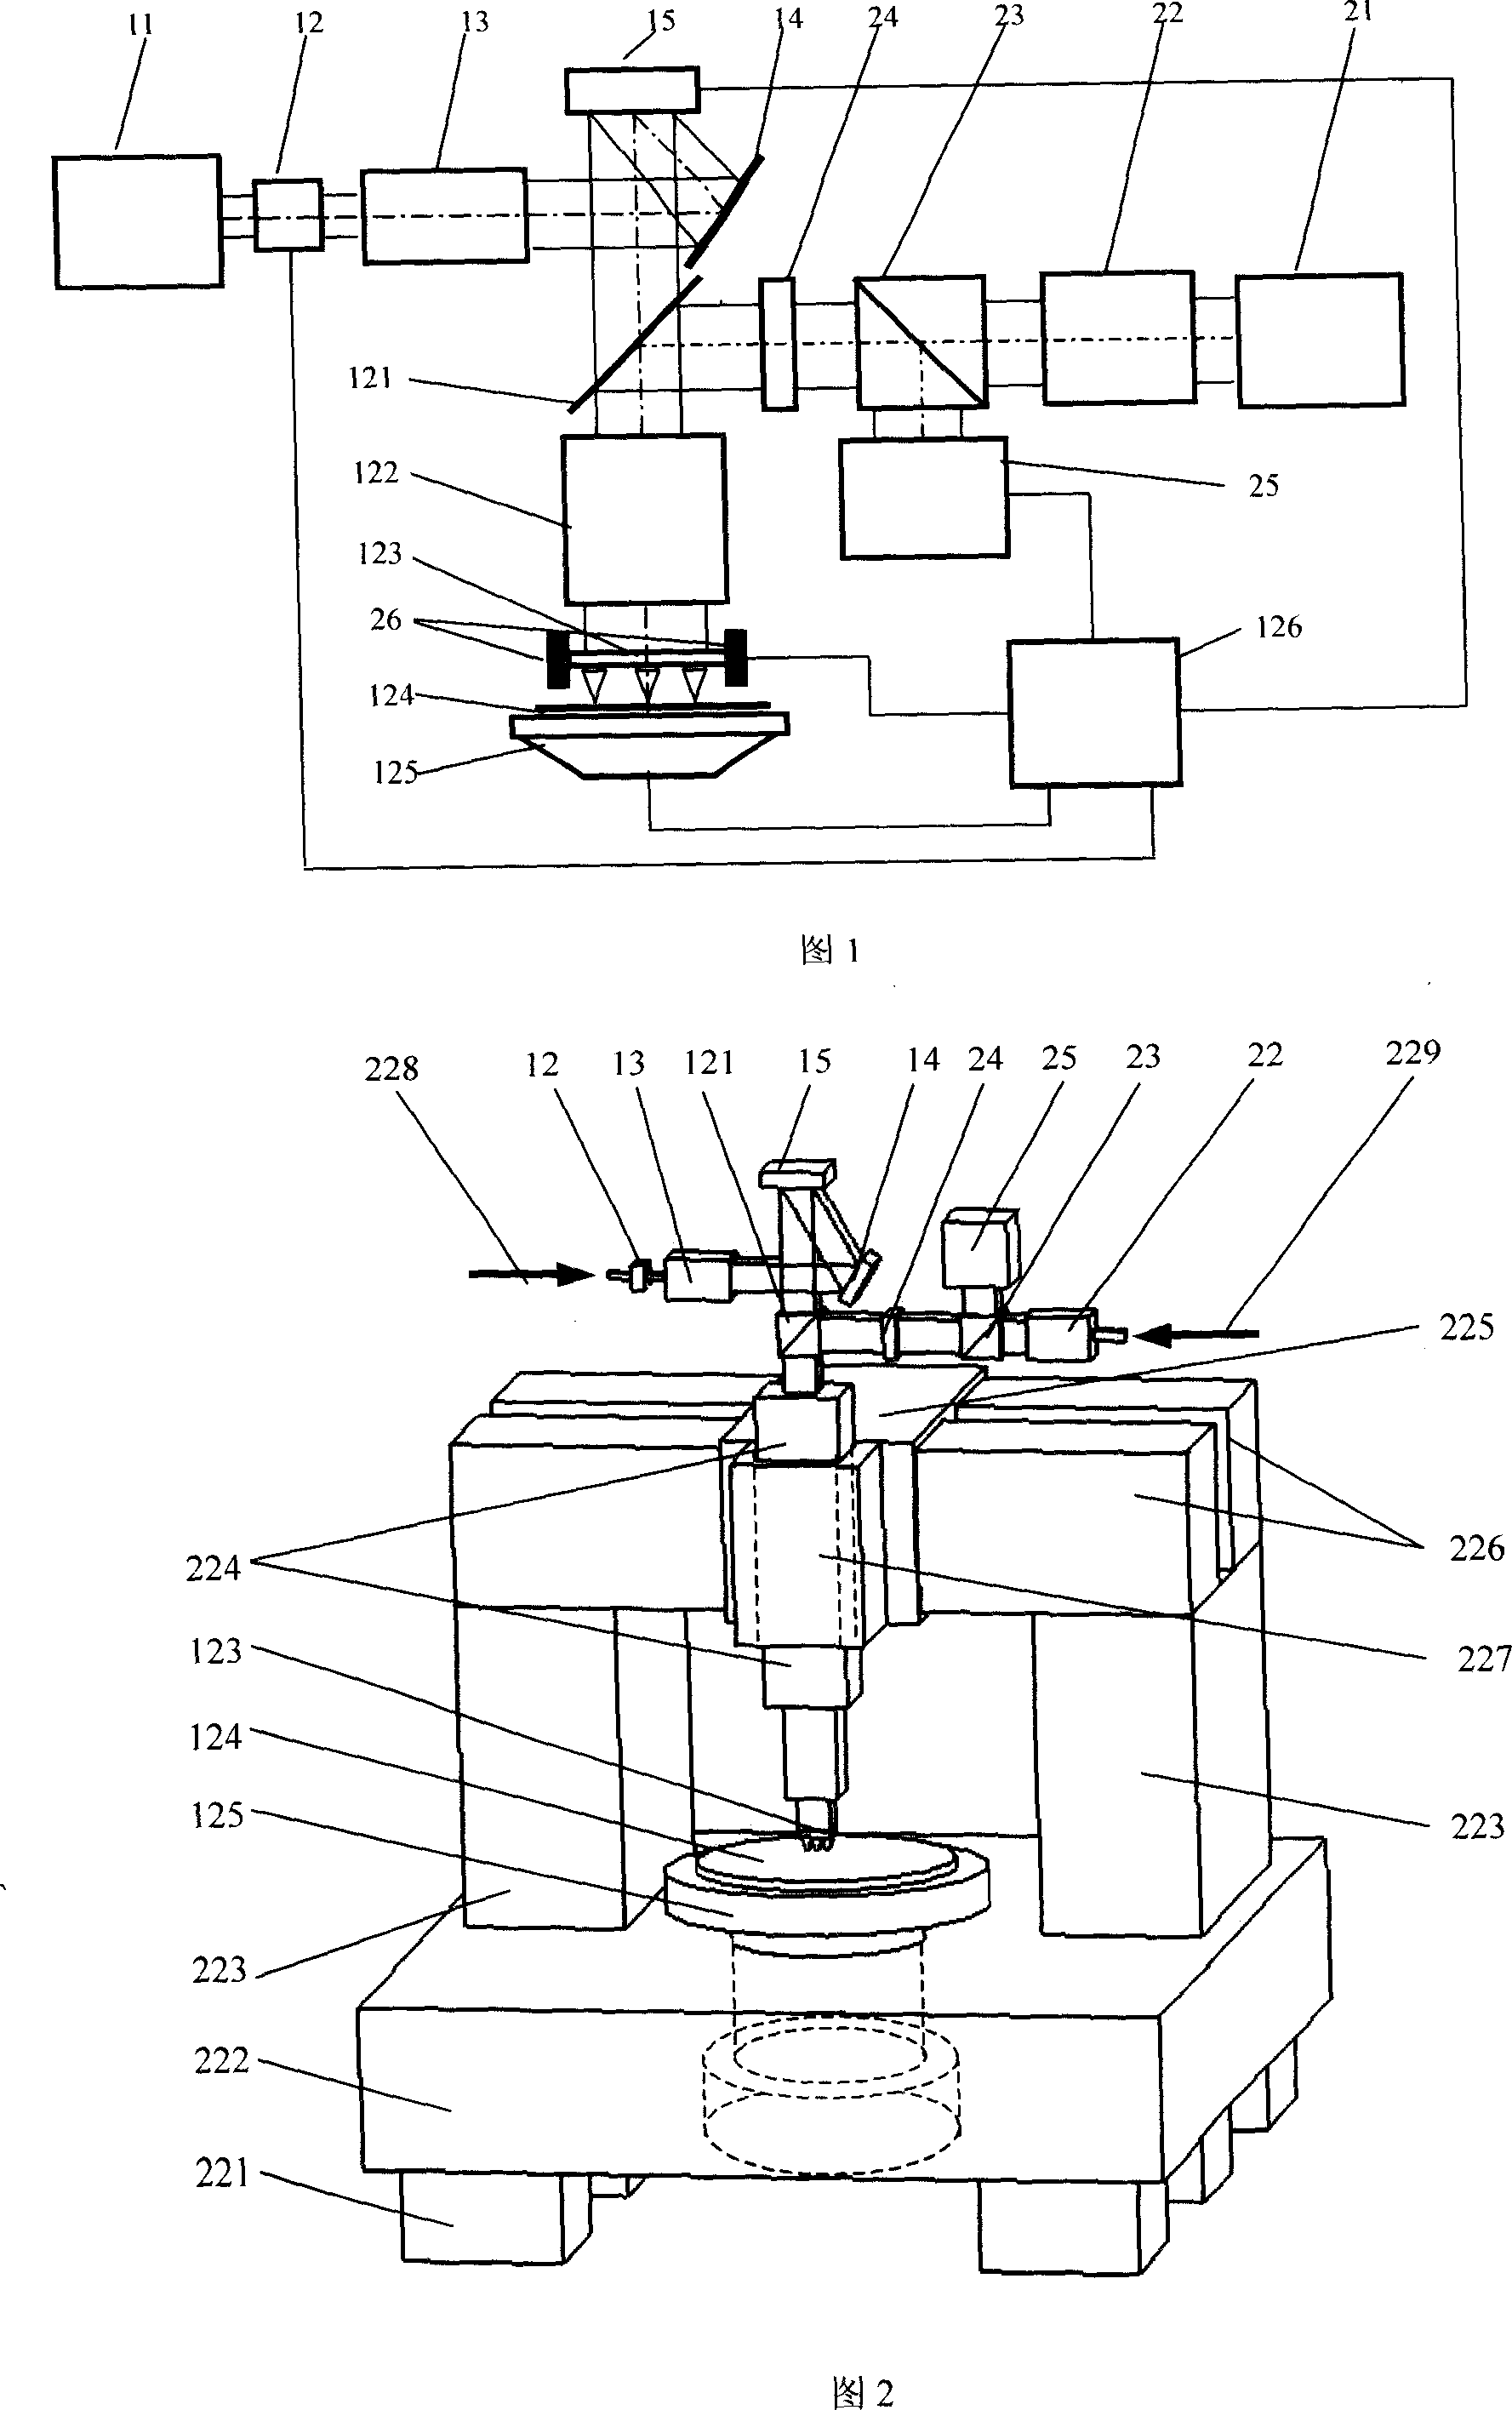 Direct write-in method and apparatus of parallel laser based on harmonic resonance method